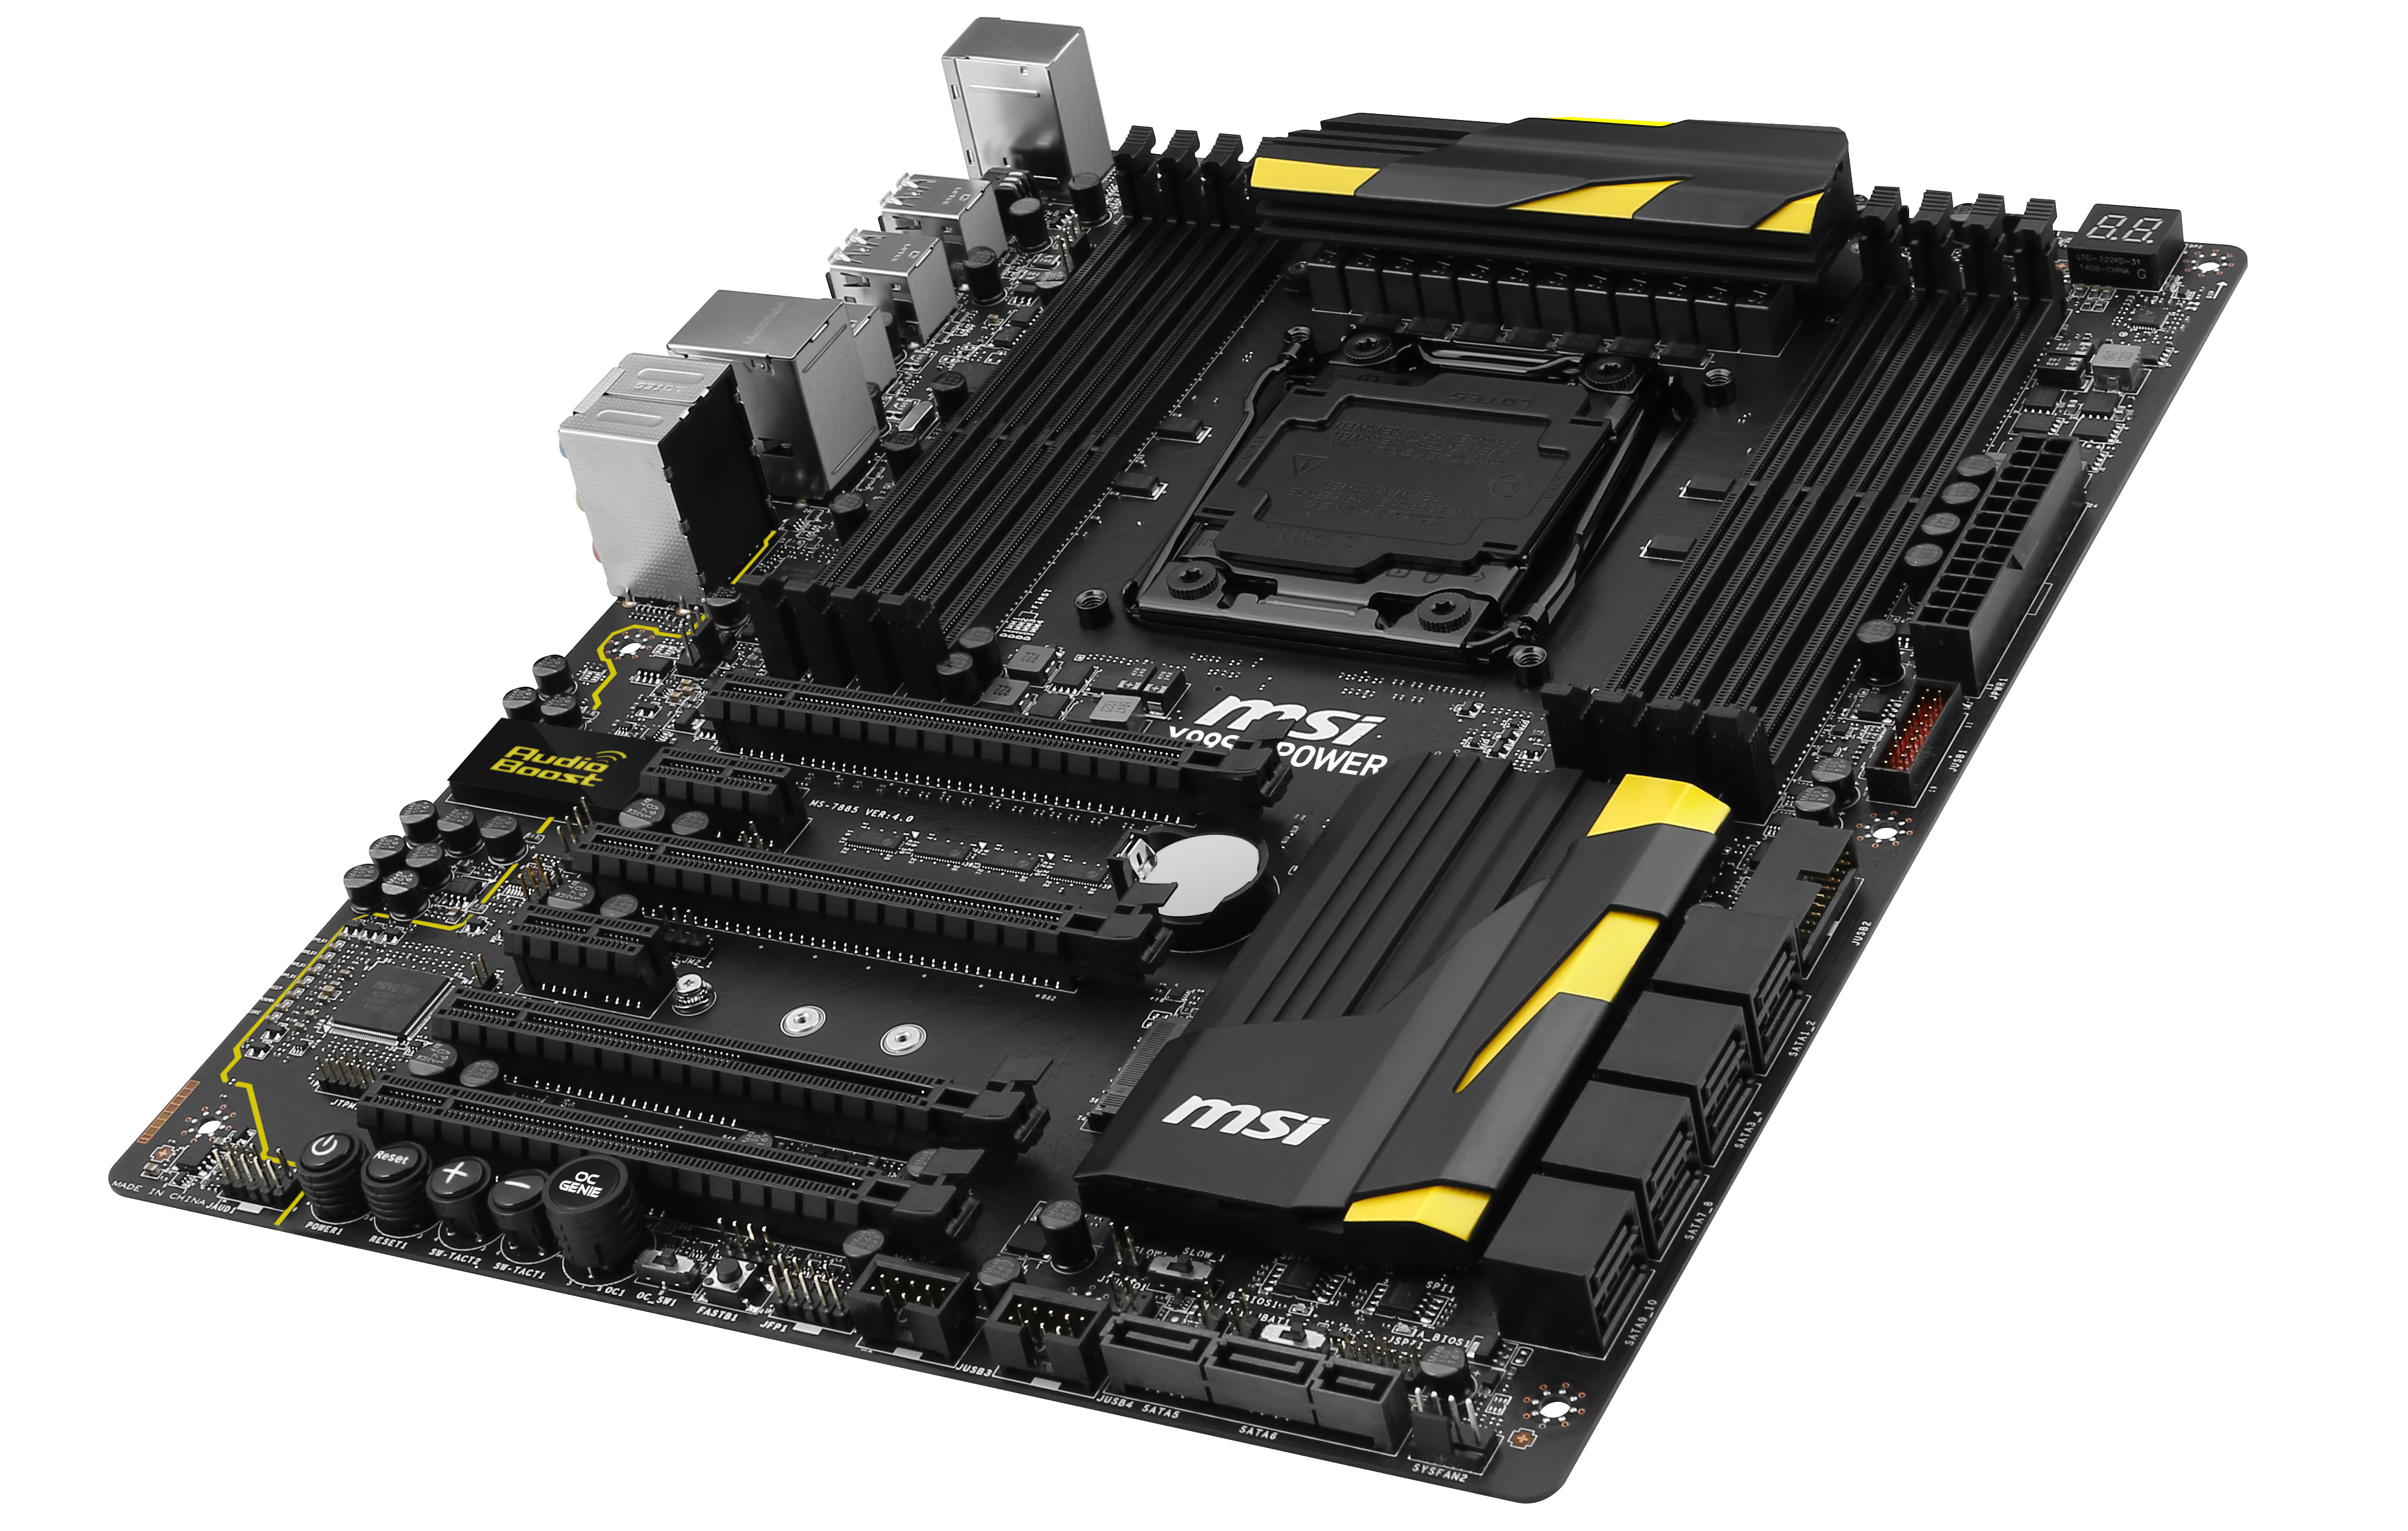 MSI X99S MPower Review: Sting Like a Bee